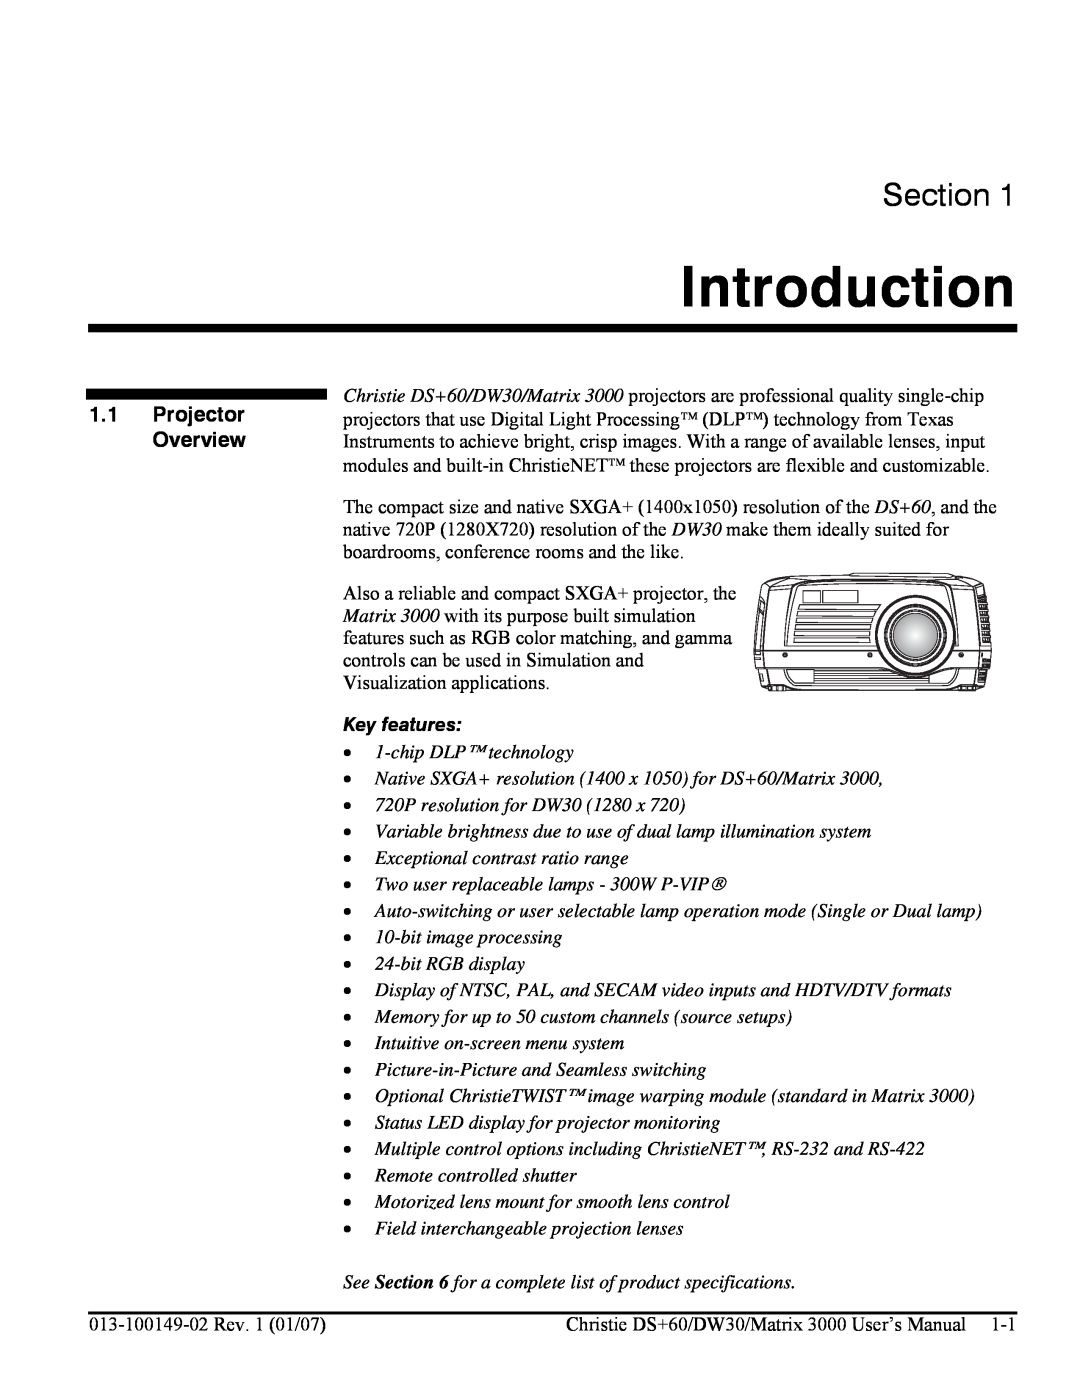 Texas Instruments MATRIX 3000, DW30 user manual Introduction, Section, Projector Overview, Key features, chip DLP technology 